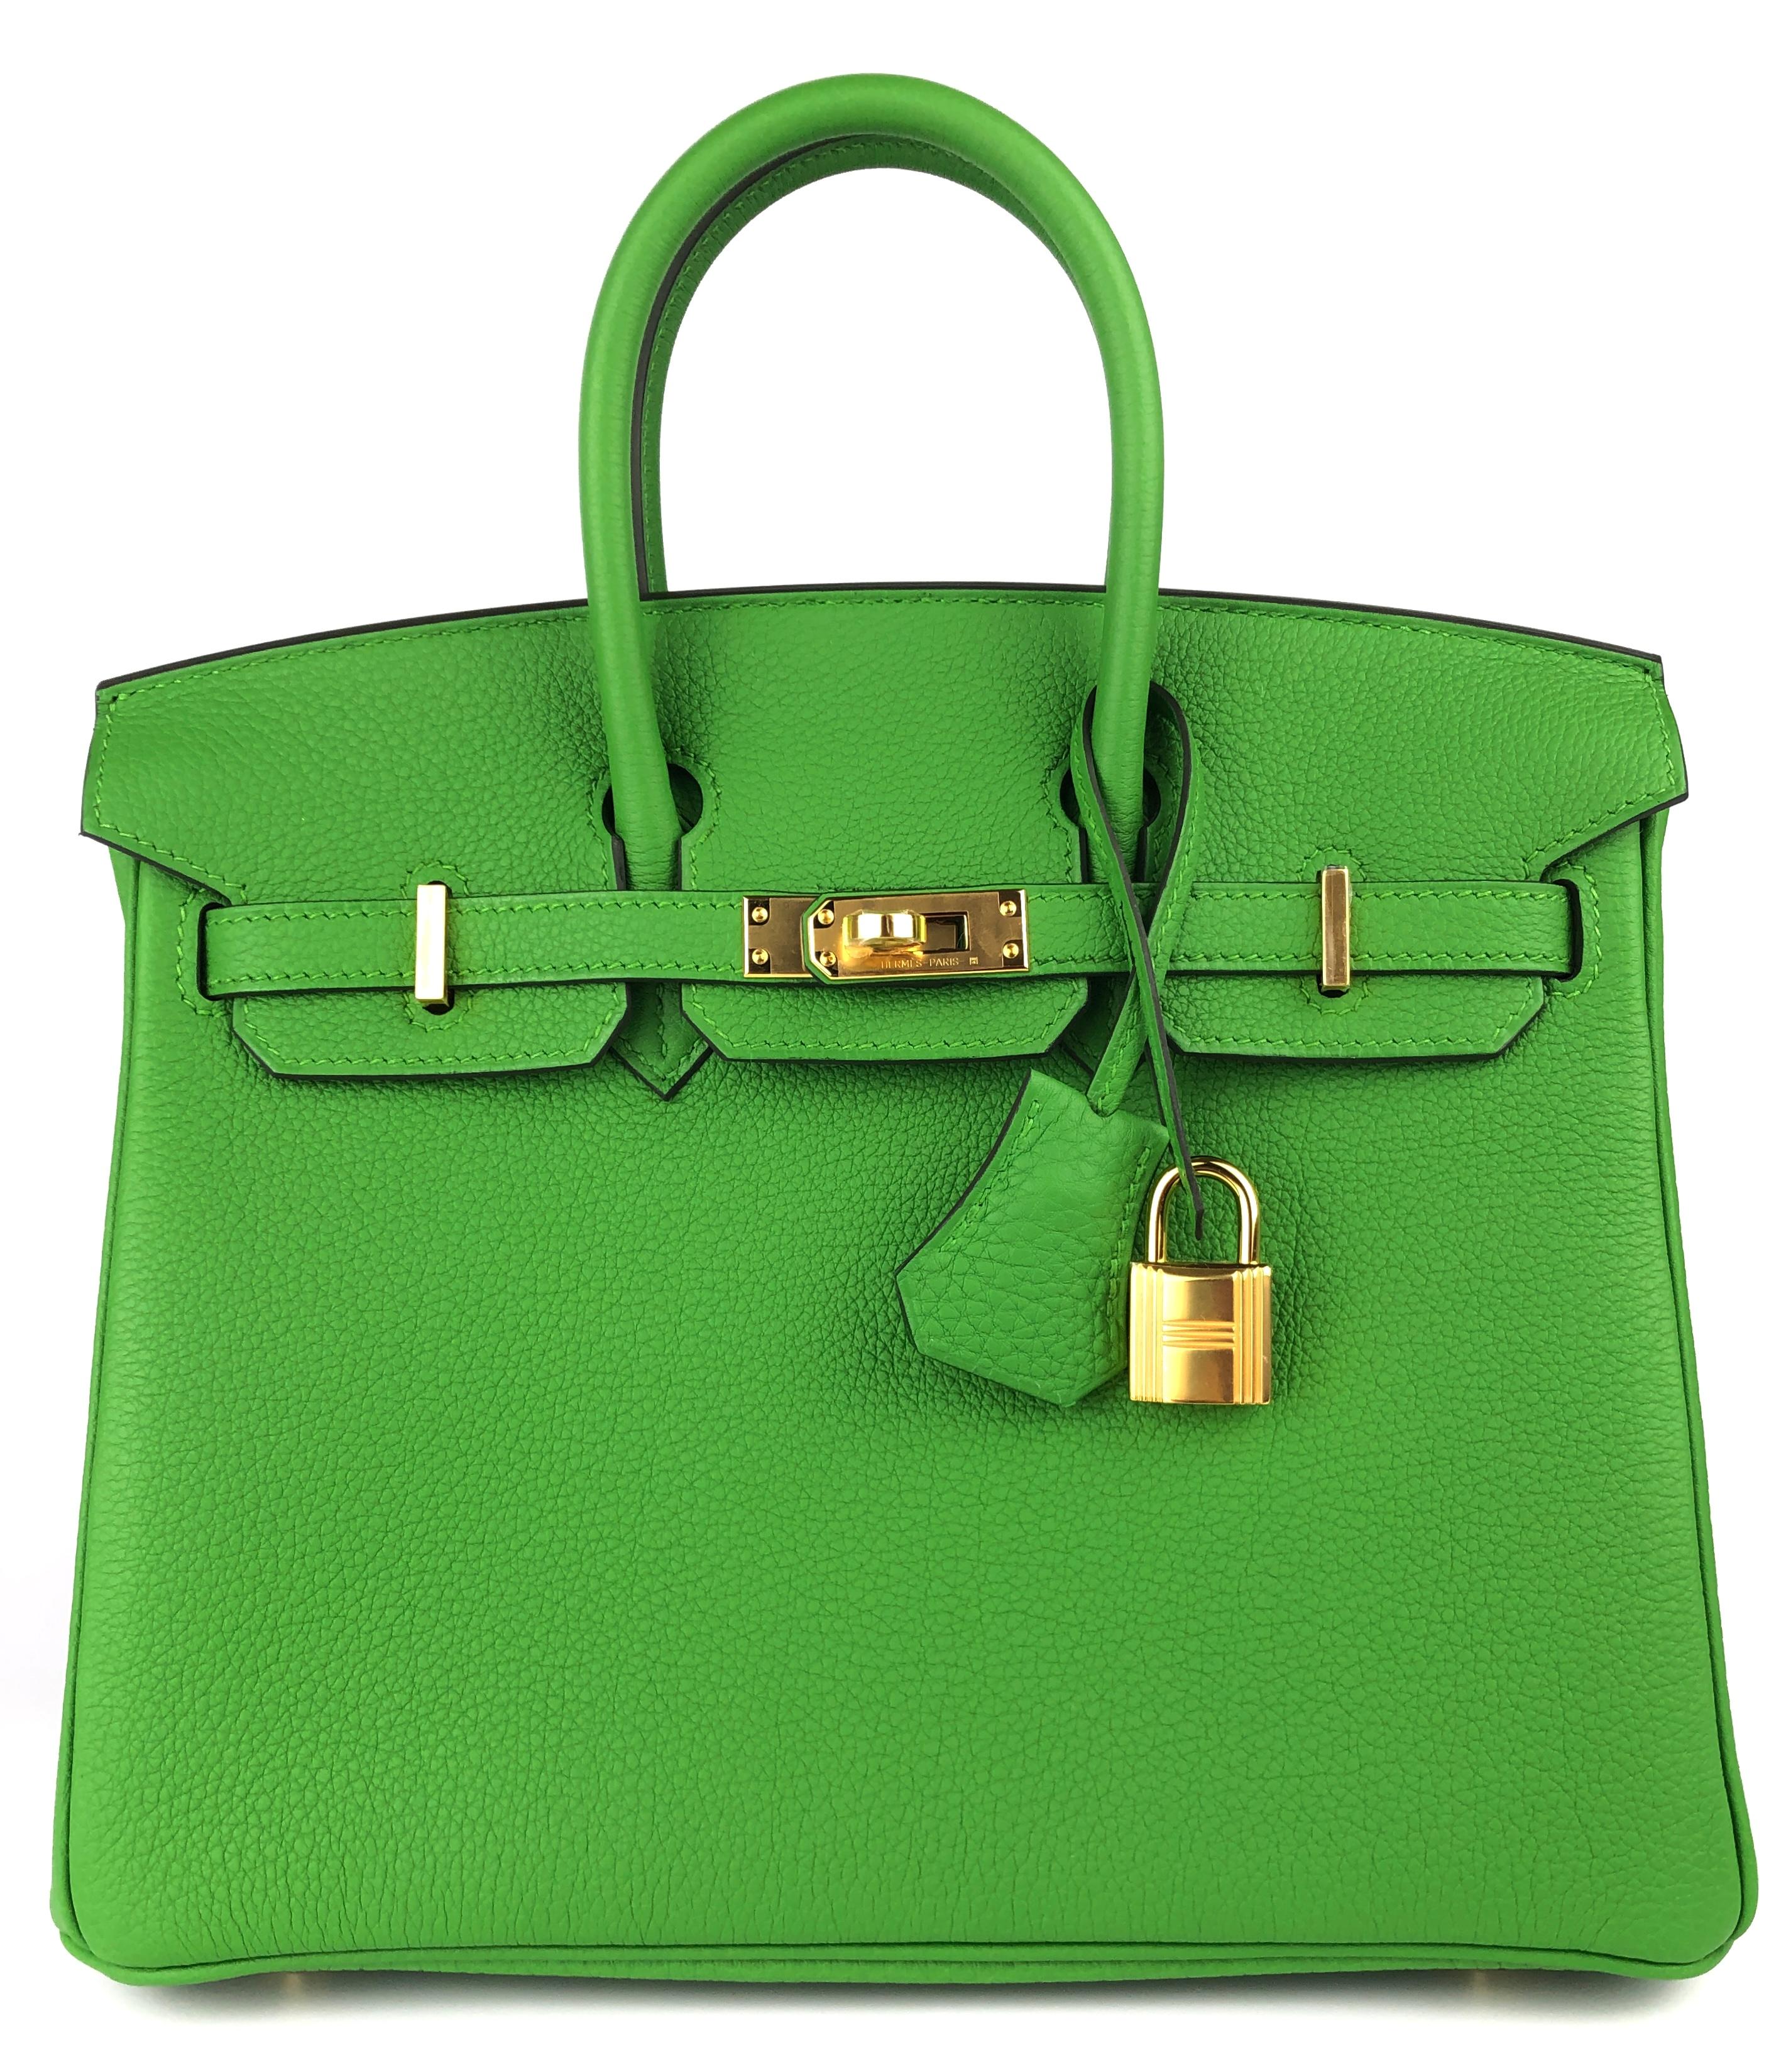 Absolutely Stunning and One The Most Coveted and Difficult and RARE to get NEW Hermes Combos! New Hermes Birkin 25 Vert Yucca Green Togo Leather complimented by Gold Hardware. B Stamp 2023.

Shop With Confidence from Lux Addicts. Authenticity